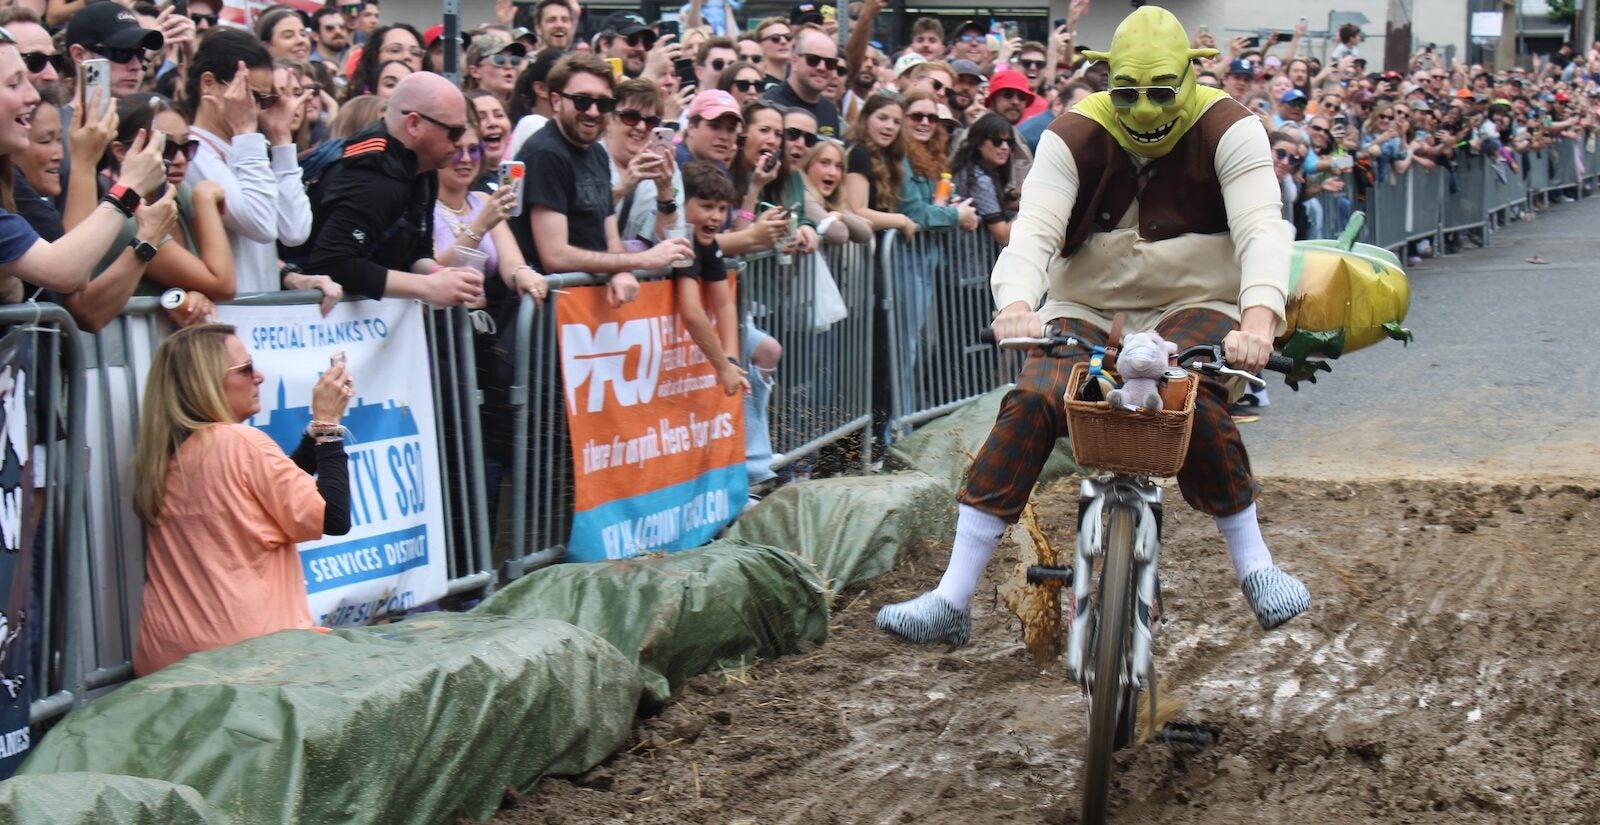 Shrek, from “The Swamp” team, rides through the mud pit at the 2024 Kensington Derby.